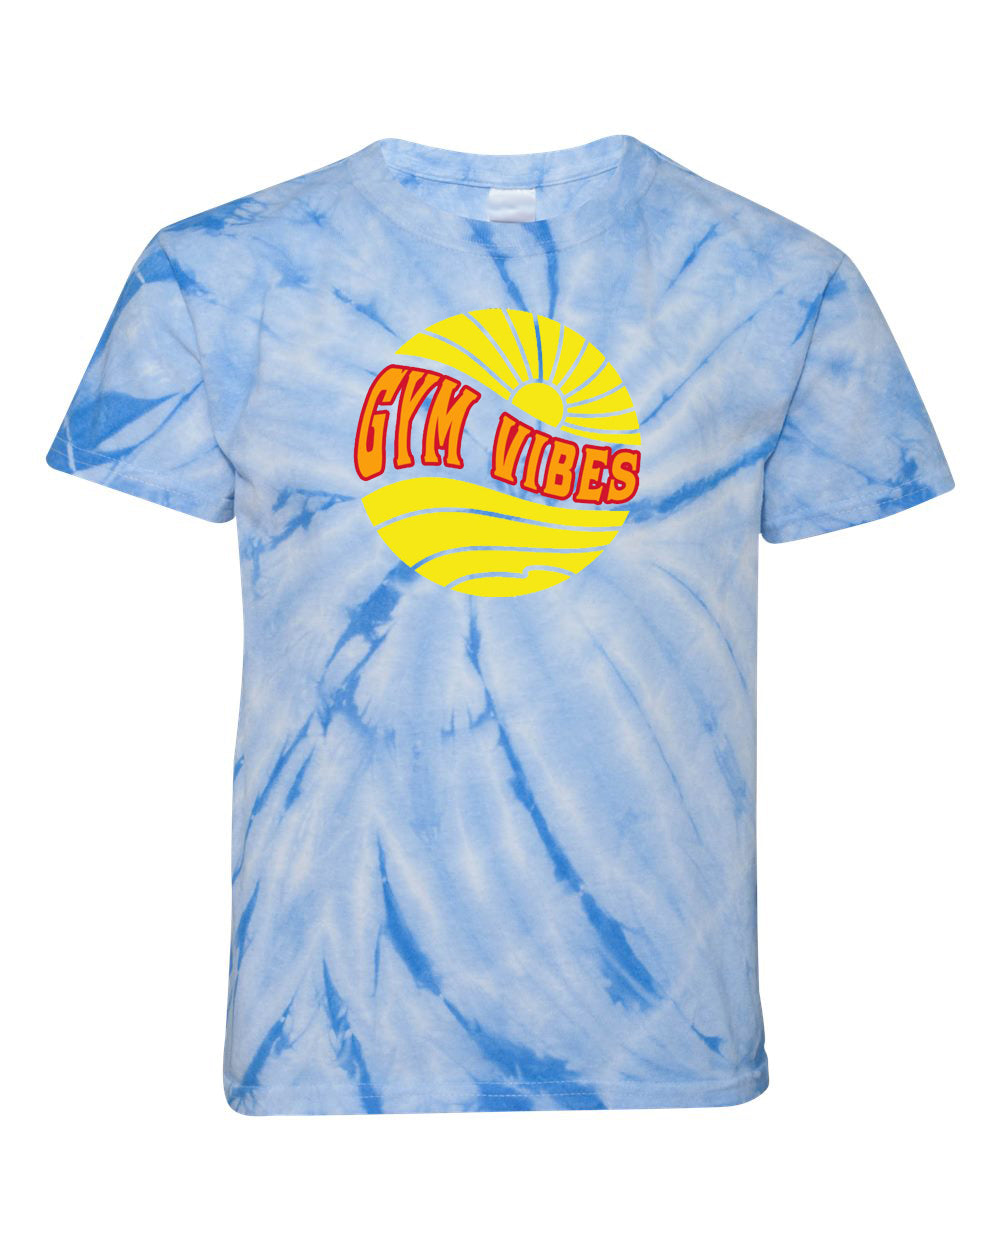 Gym Vibes Youth Tie Dye T-Shirt